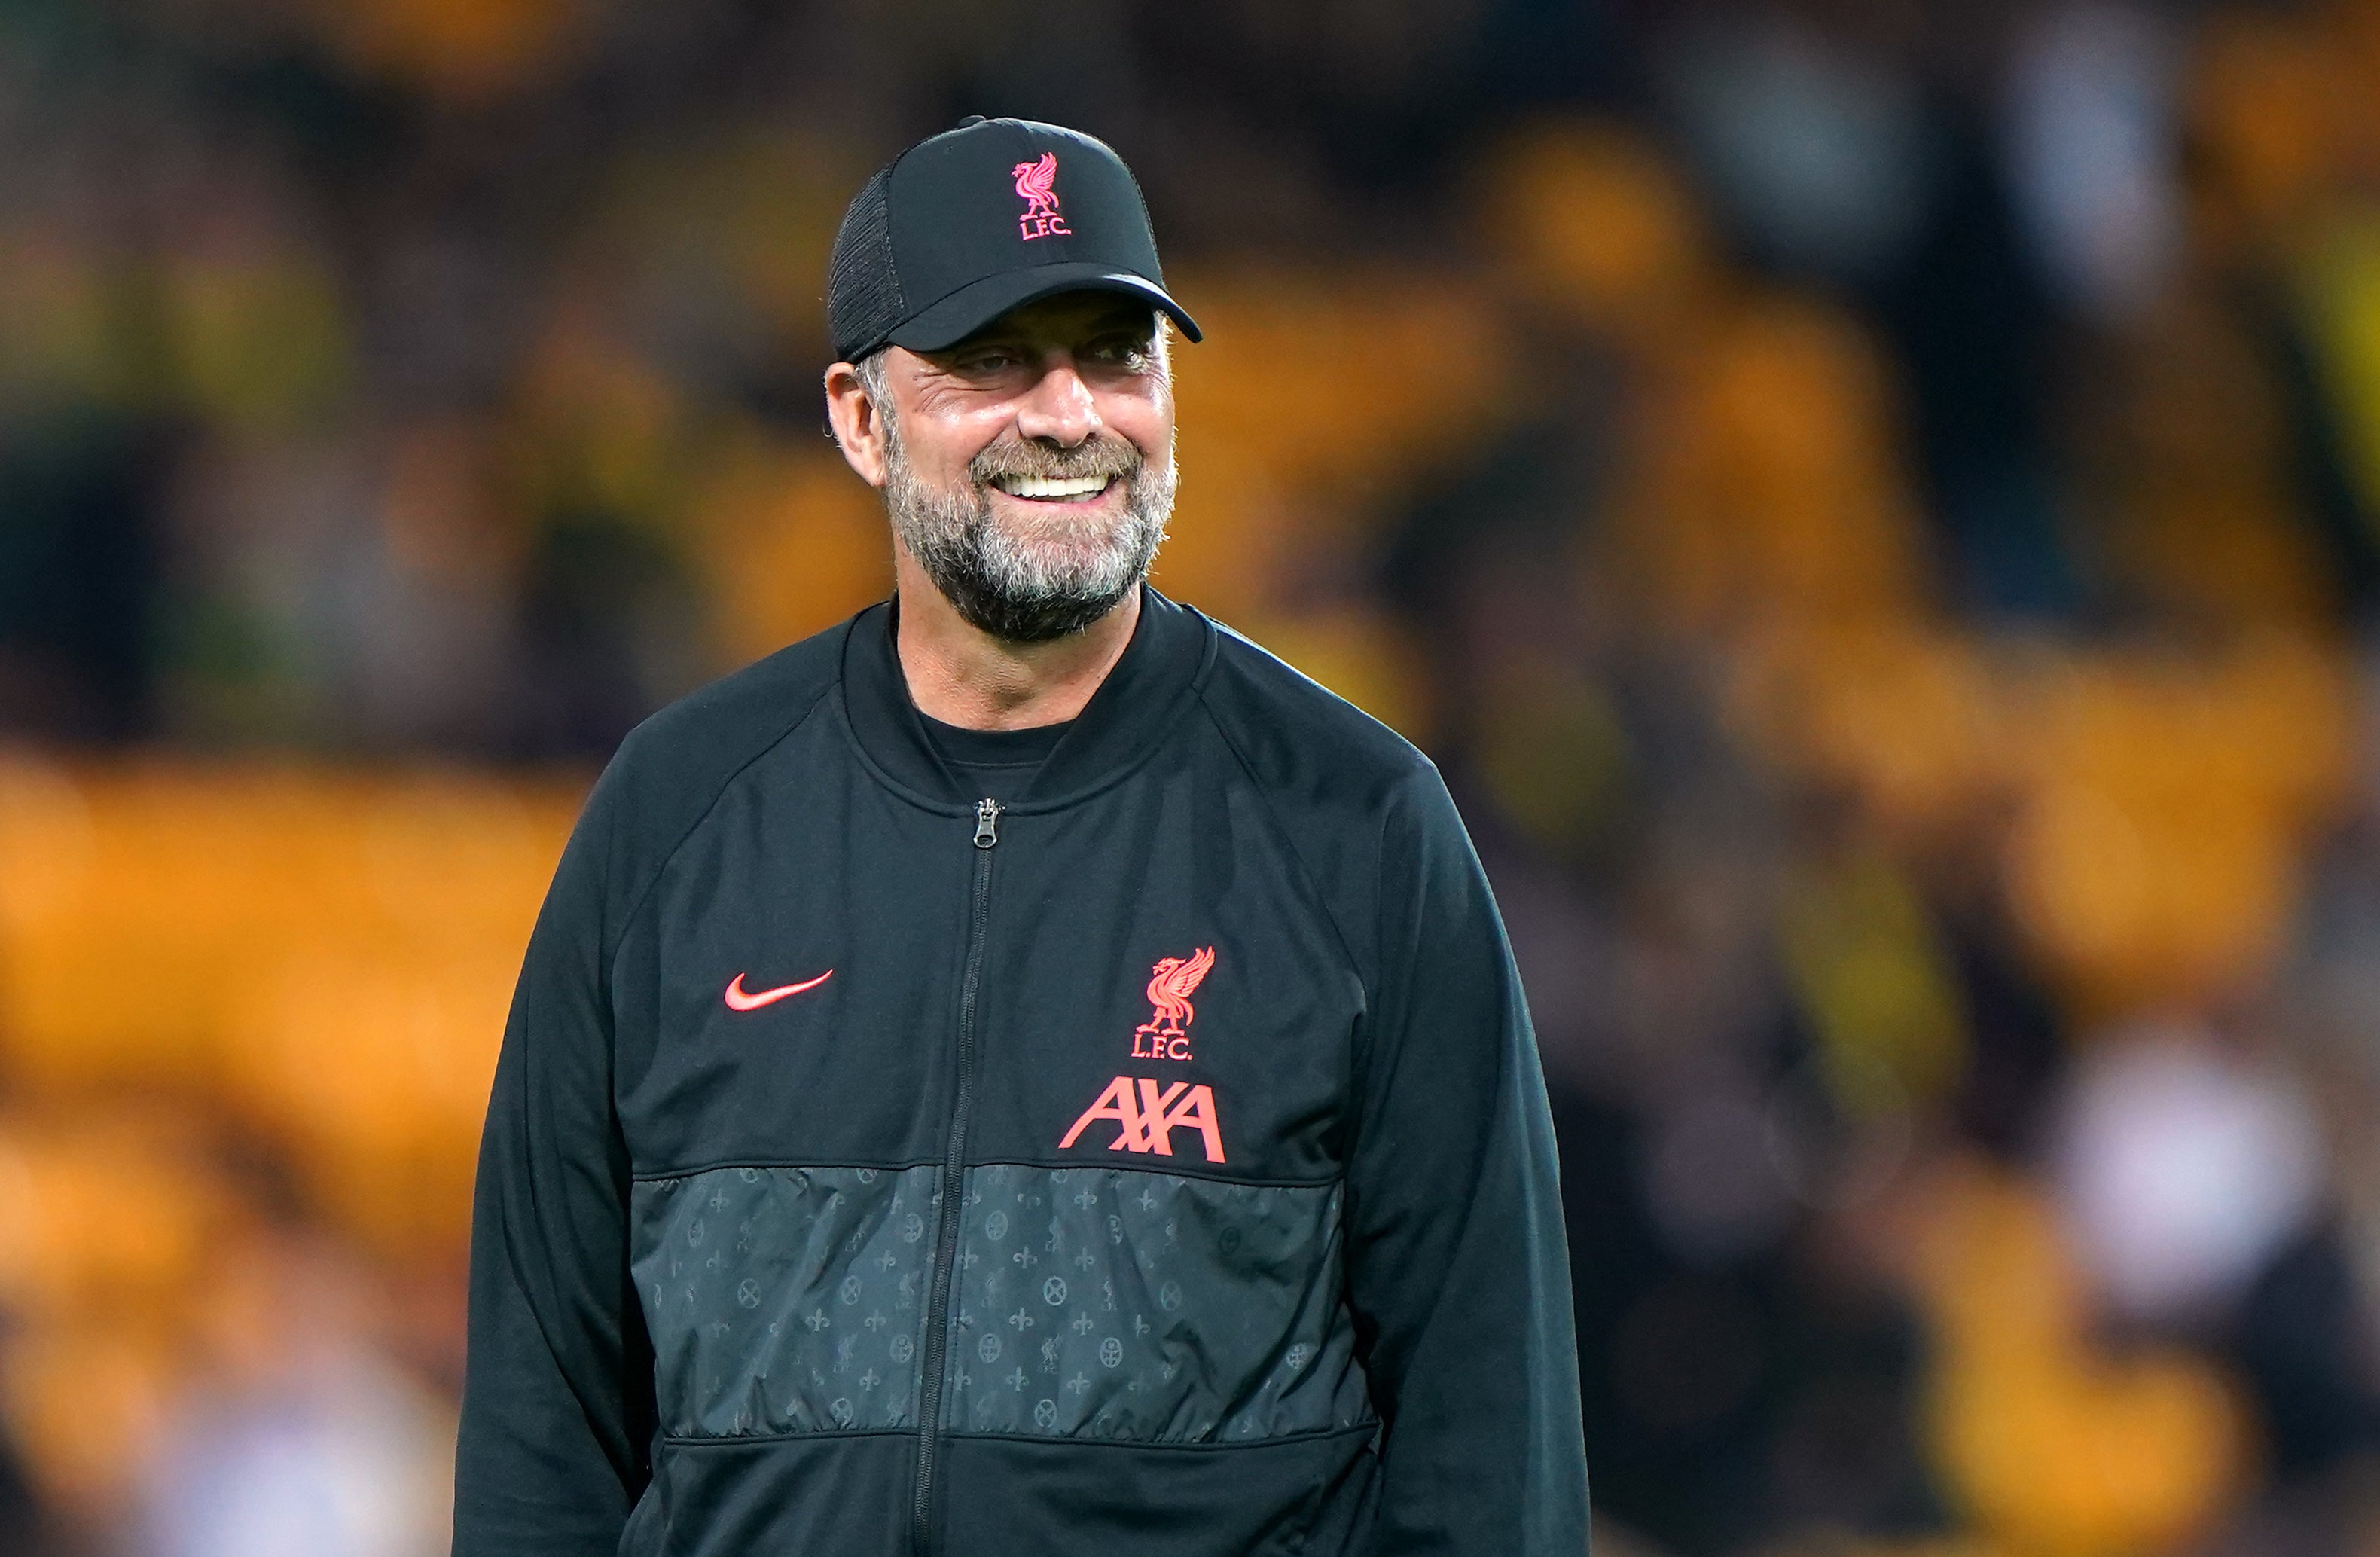 Liverpool manager Jurgen Klopp is excited at the prospect of safe standing being trialled at the top level of the English game (Joe Giddens/PA)